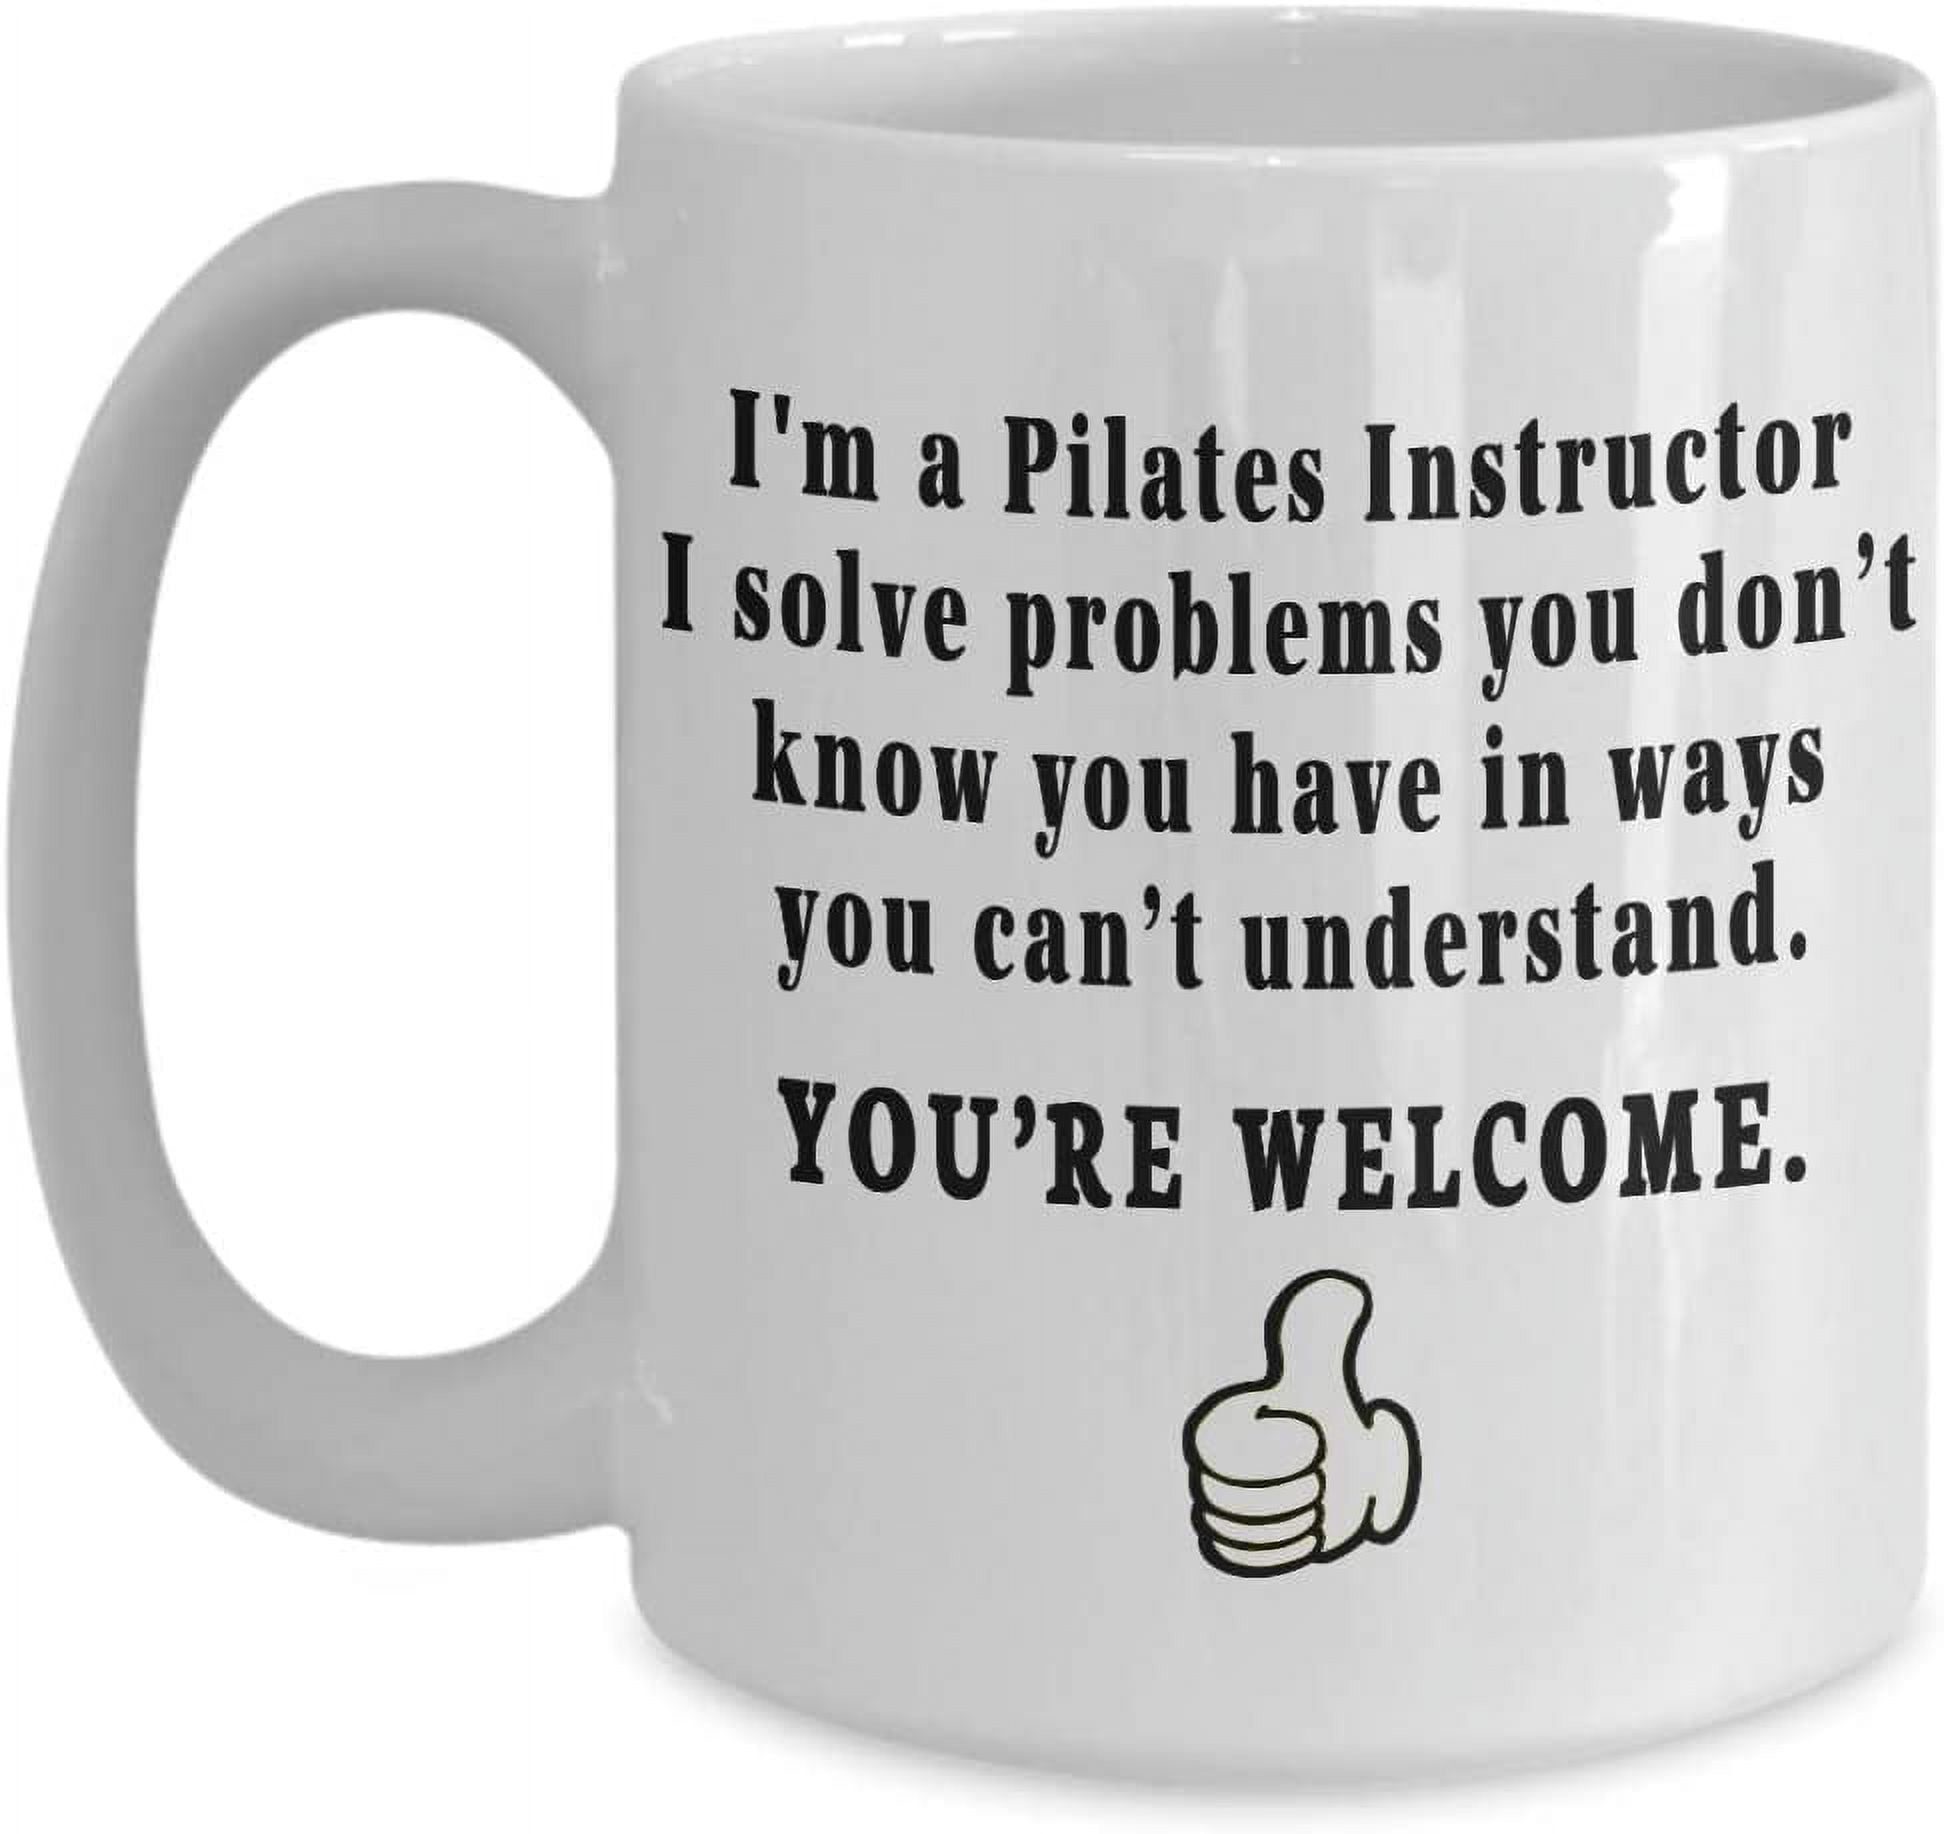  Fitness Coffee Cup, Fitness, Fitness Instructor, Funny Fitness  Gifts, Fitness Cup, Workout Mug, Gym Gift : Home & Kitchen